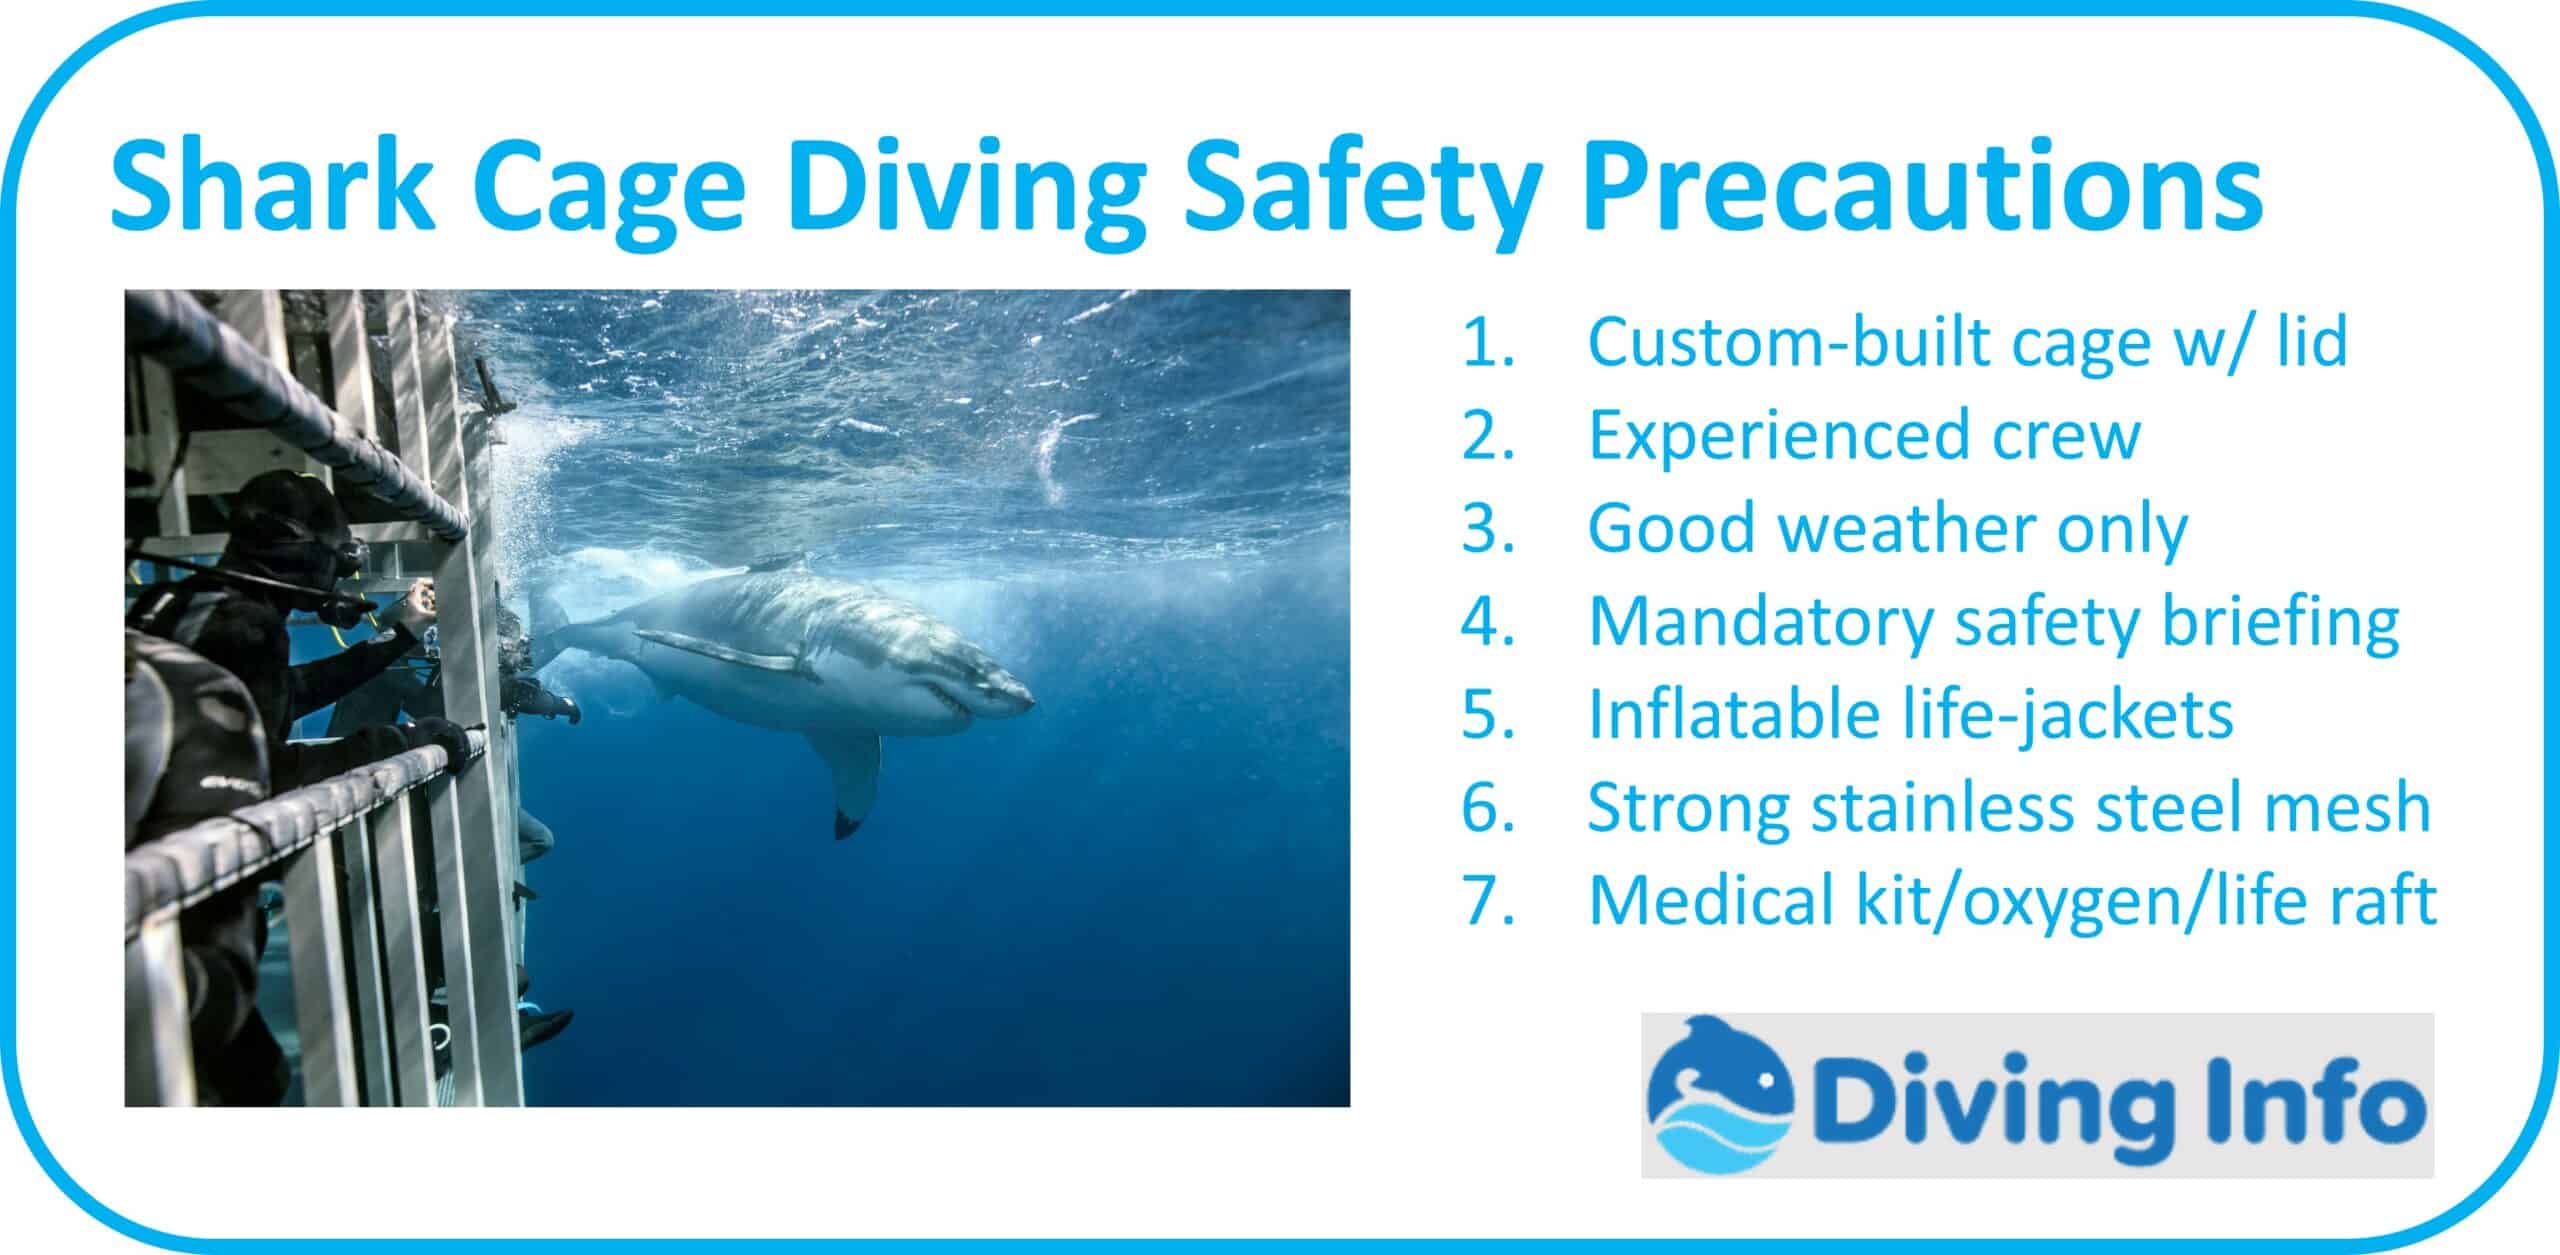 Shark Cage Diving Safety Precautions